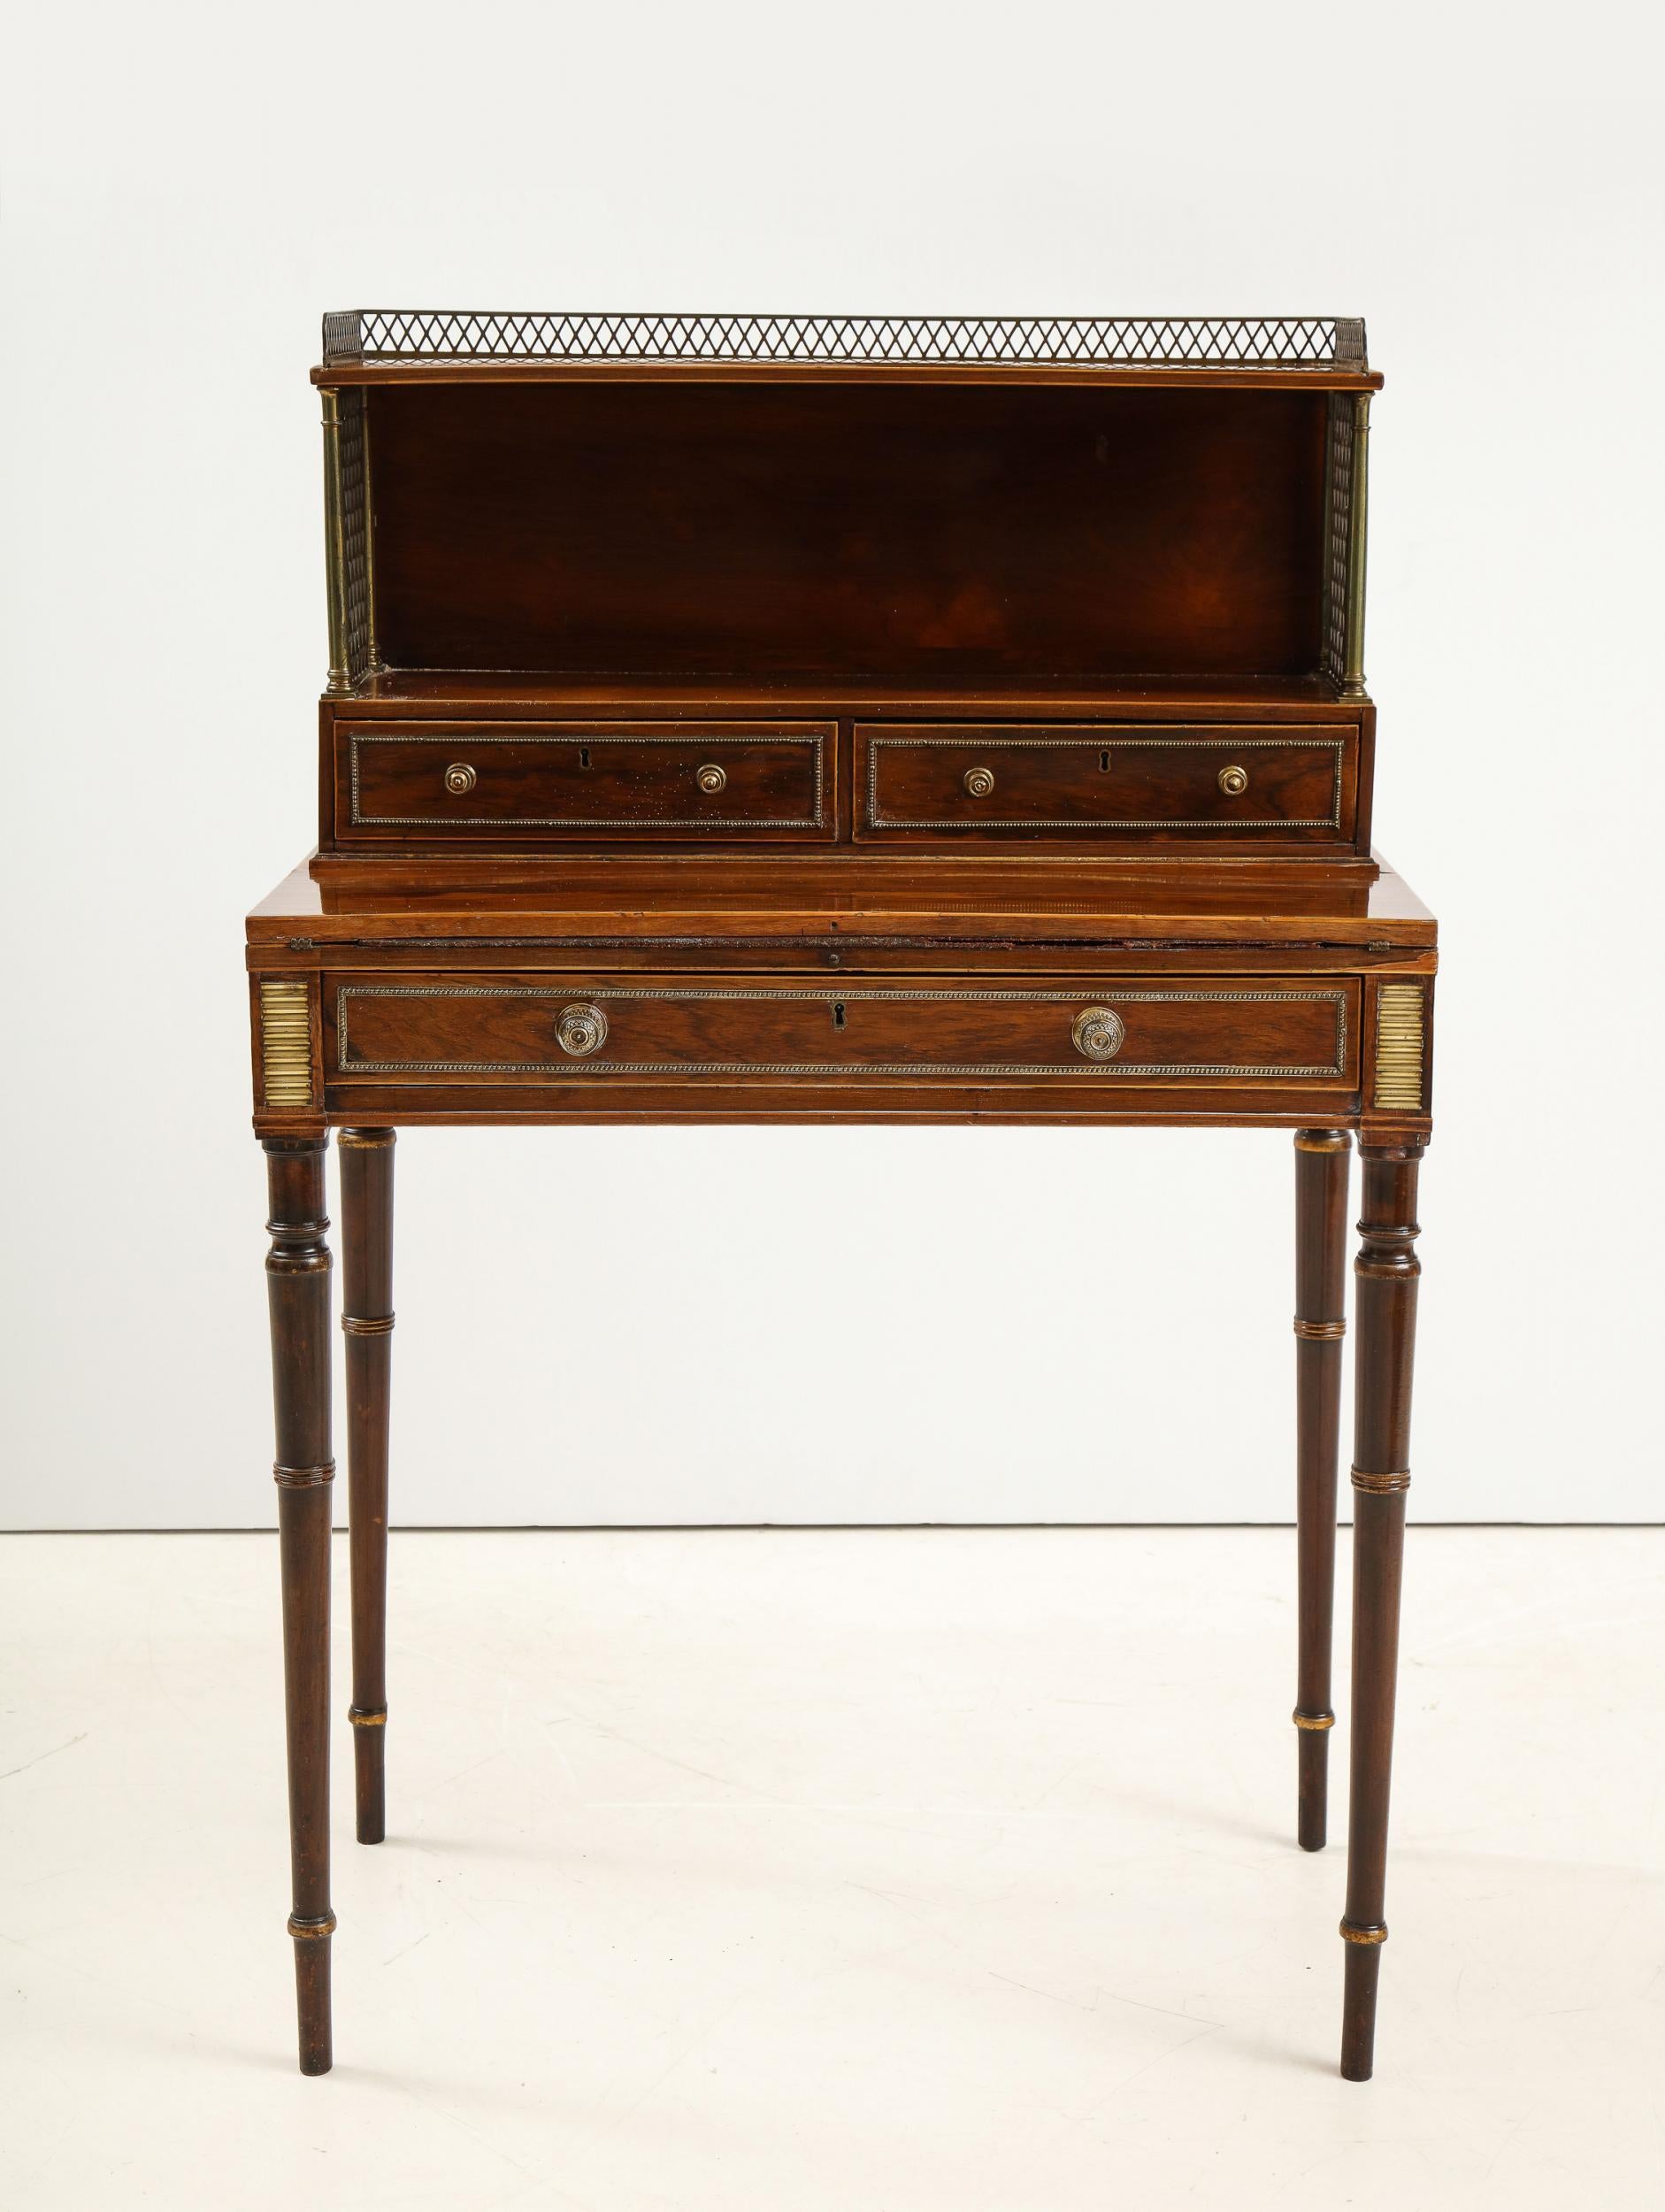 Very fine English Regency period bonheur du jour attributed to John McLean & Son, the rectangular top having pierced gallery with turned and ring collared brass column supports with pierced diamond pattern panels of gilt-brass above a shelf fitted